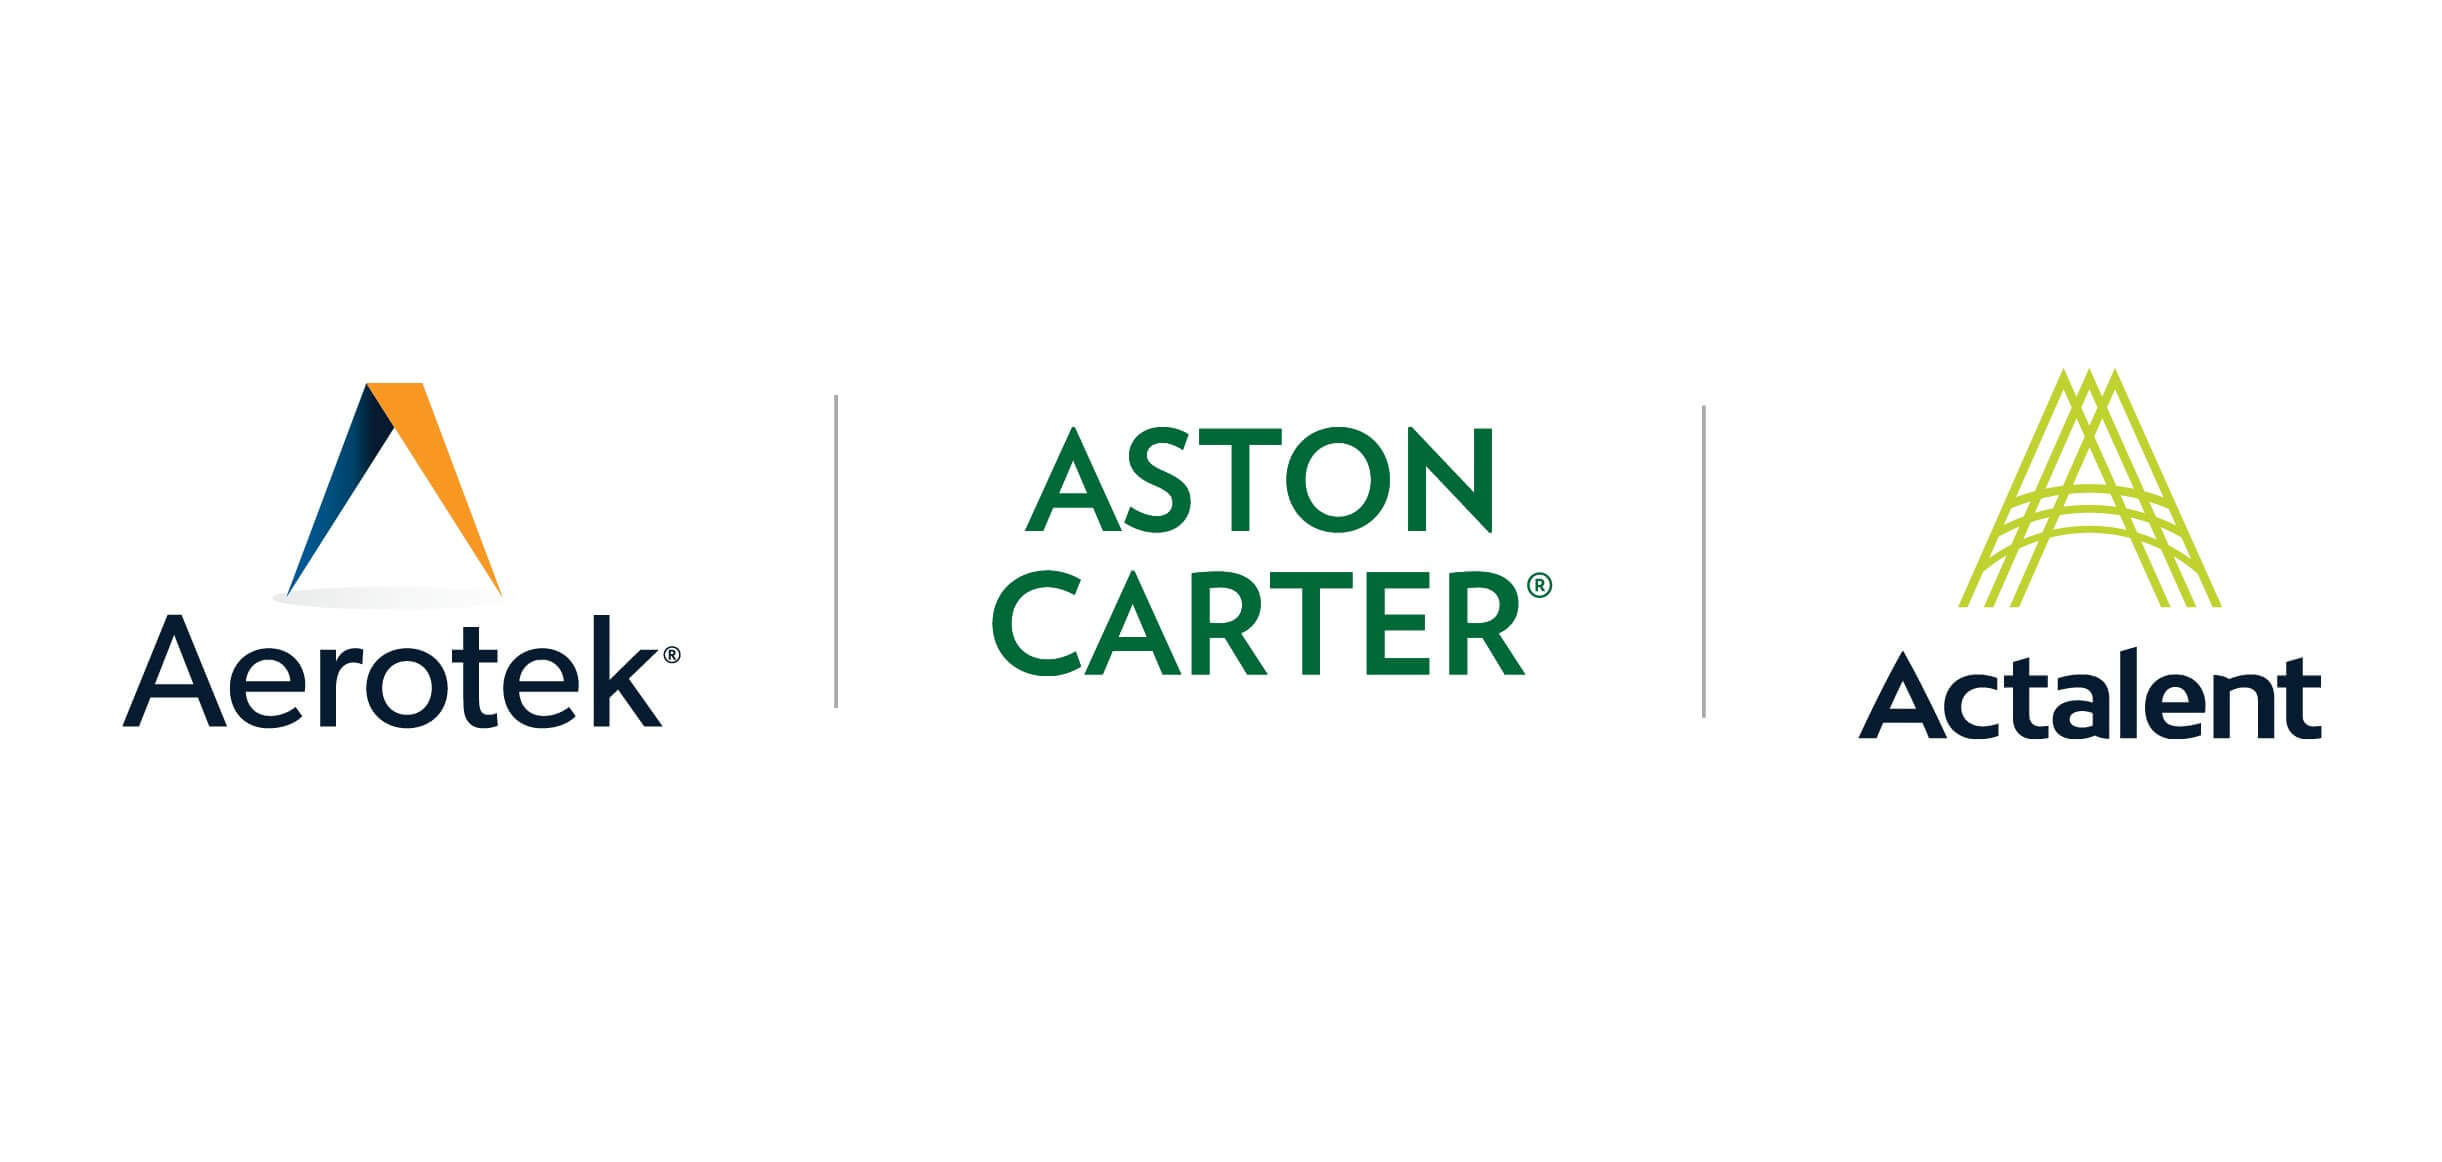 Aerotek, Aston Carter and new brand Actalent strategically align to provide customized talent solutions.